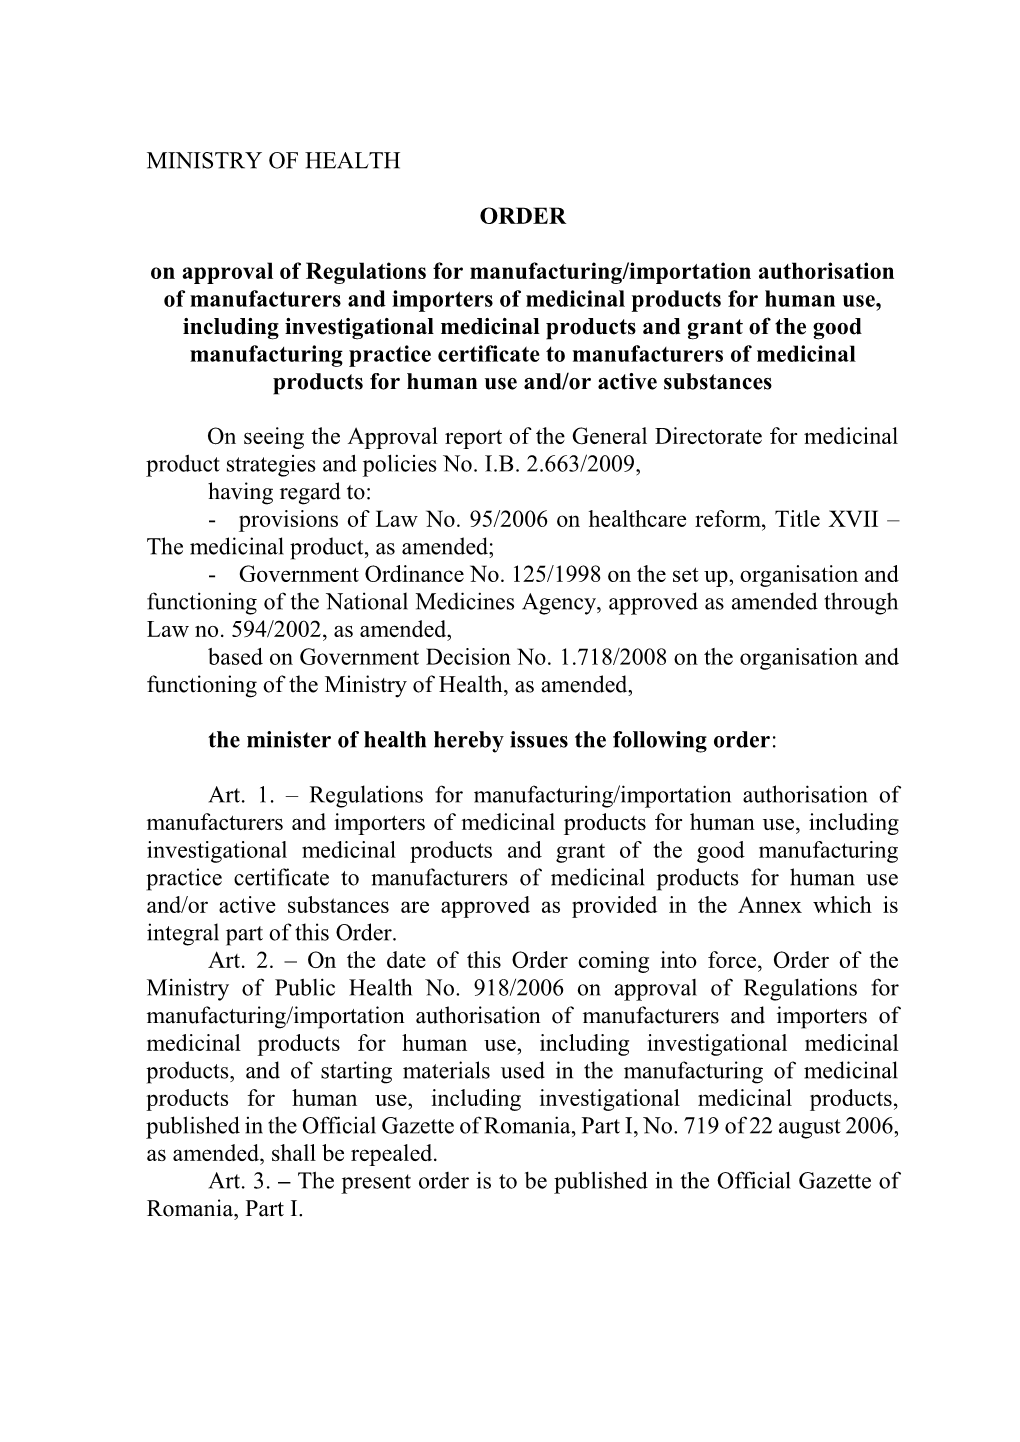 MINISTRY of HEALTH ORDER on Approval of Regulations for Manufacturing/Importation Authorisation of Manufacturers and Importers